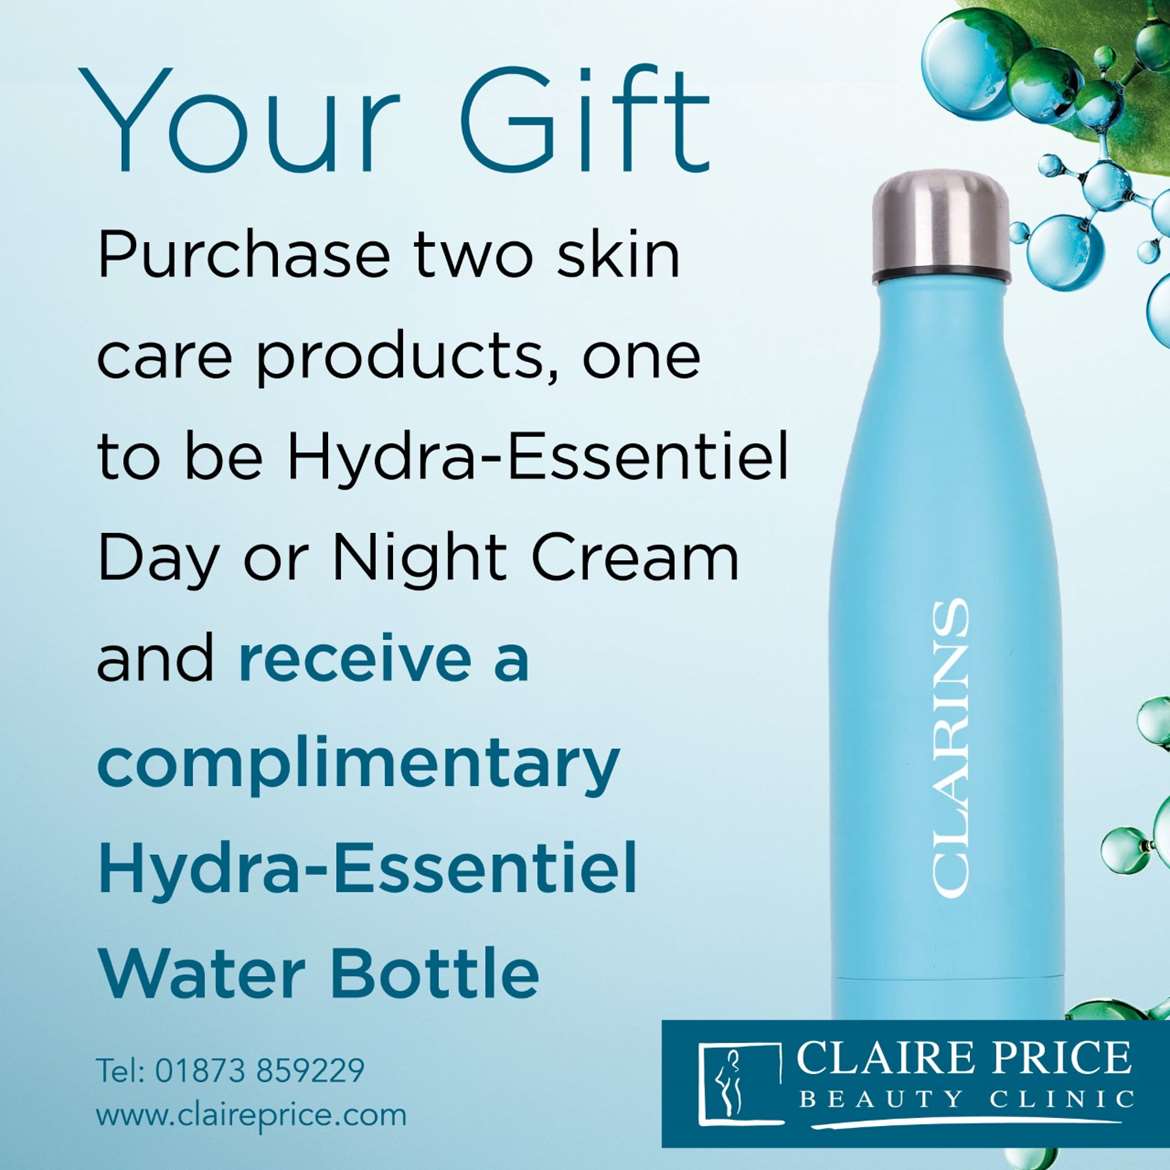 Get Glowing & Hydrated with Claire Price Beauty Clinic & Clarins